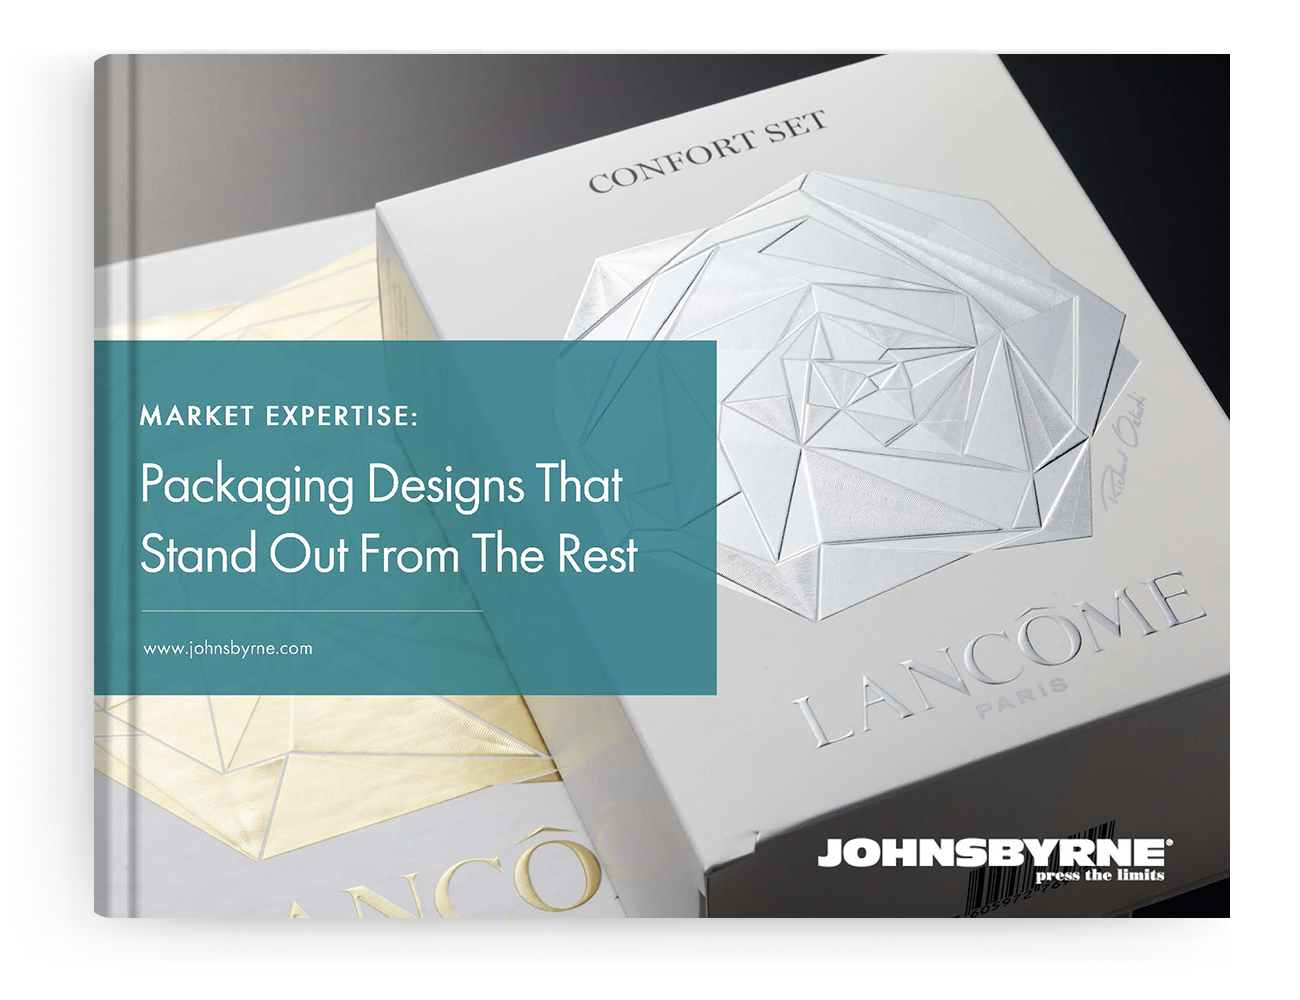 Structural Packaging Designs that Stand Out from the Rest